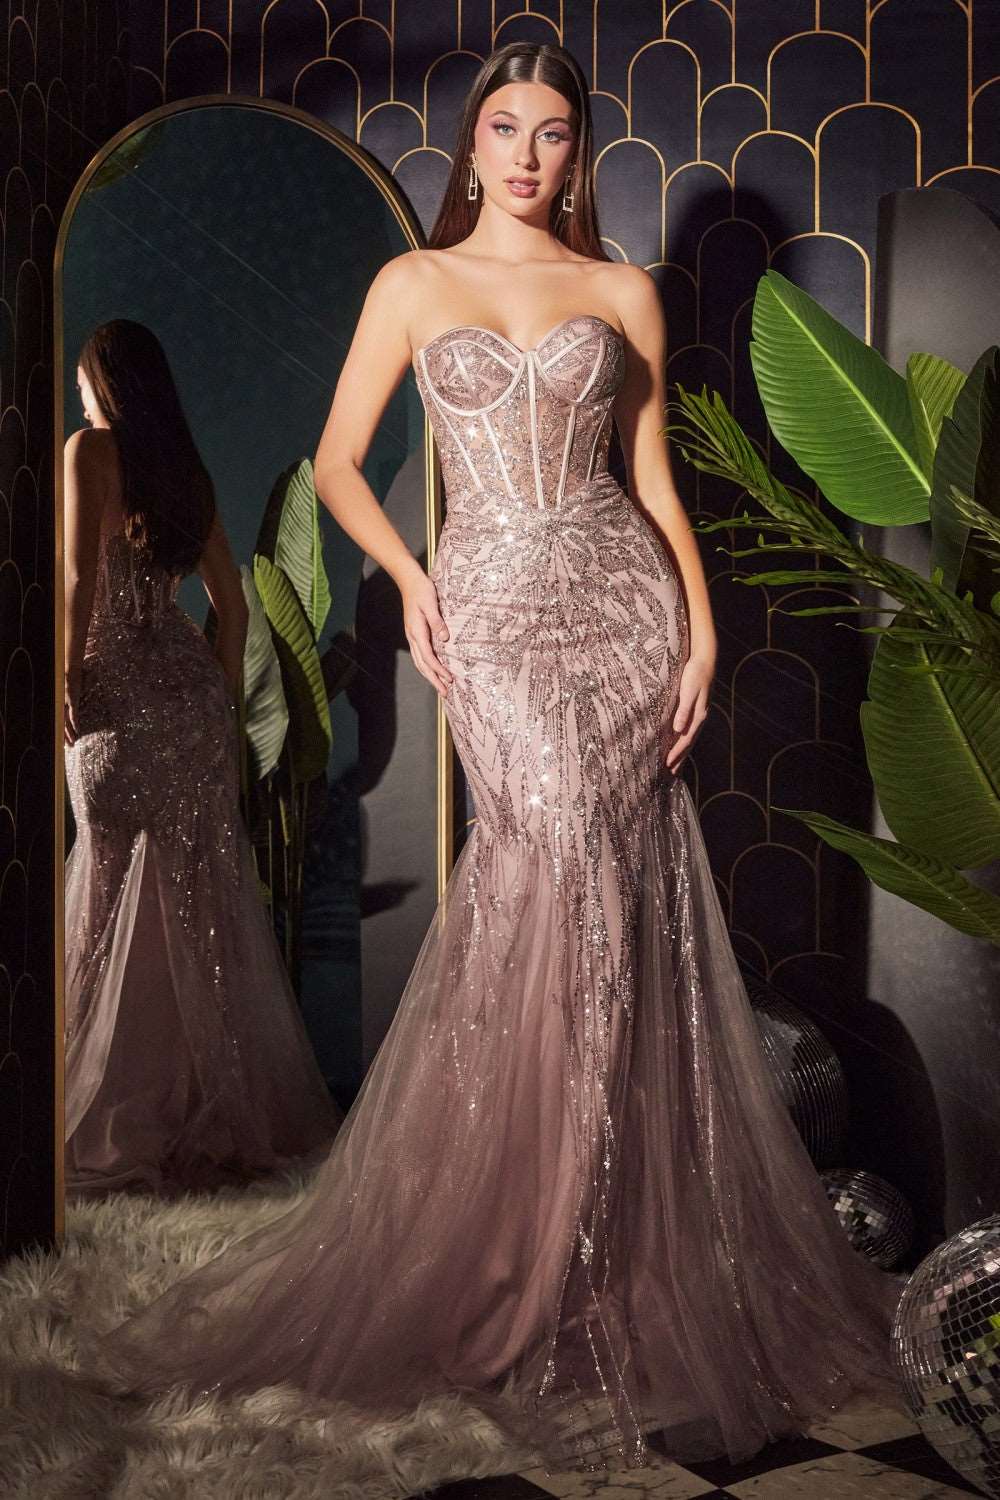 CD CB116 - Strapless Glitter Print Fit & Flare Prom Gown with Sheer Boned Bodice PROM GOWN Cinderella Divine 4 ROSE GOLD 